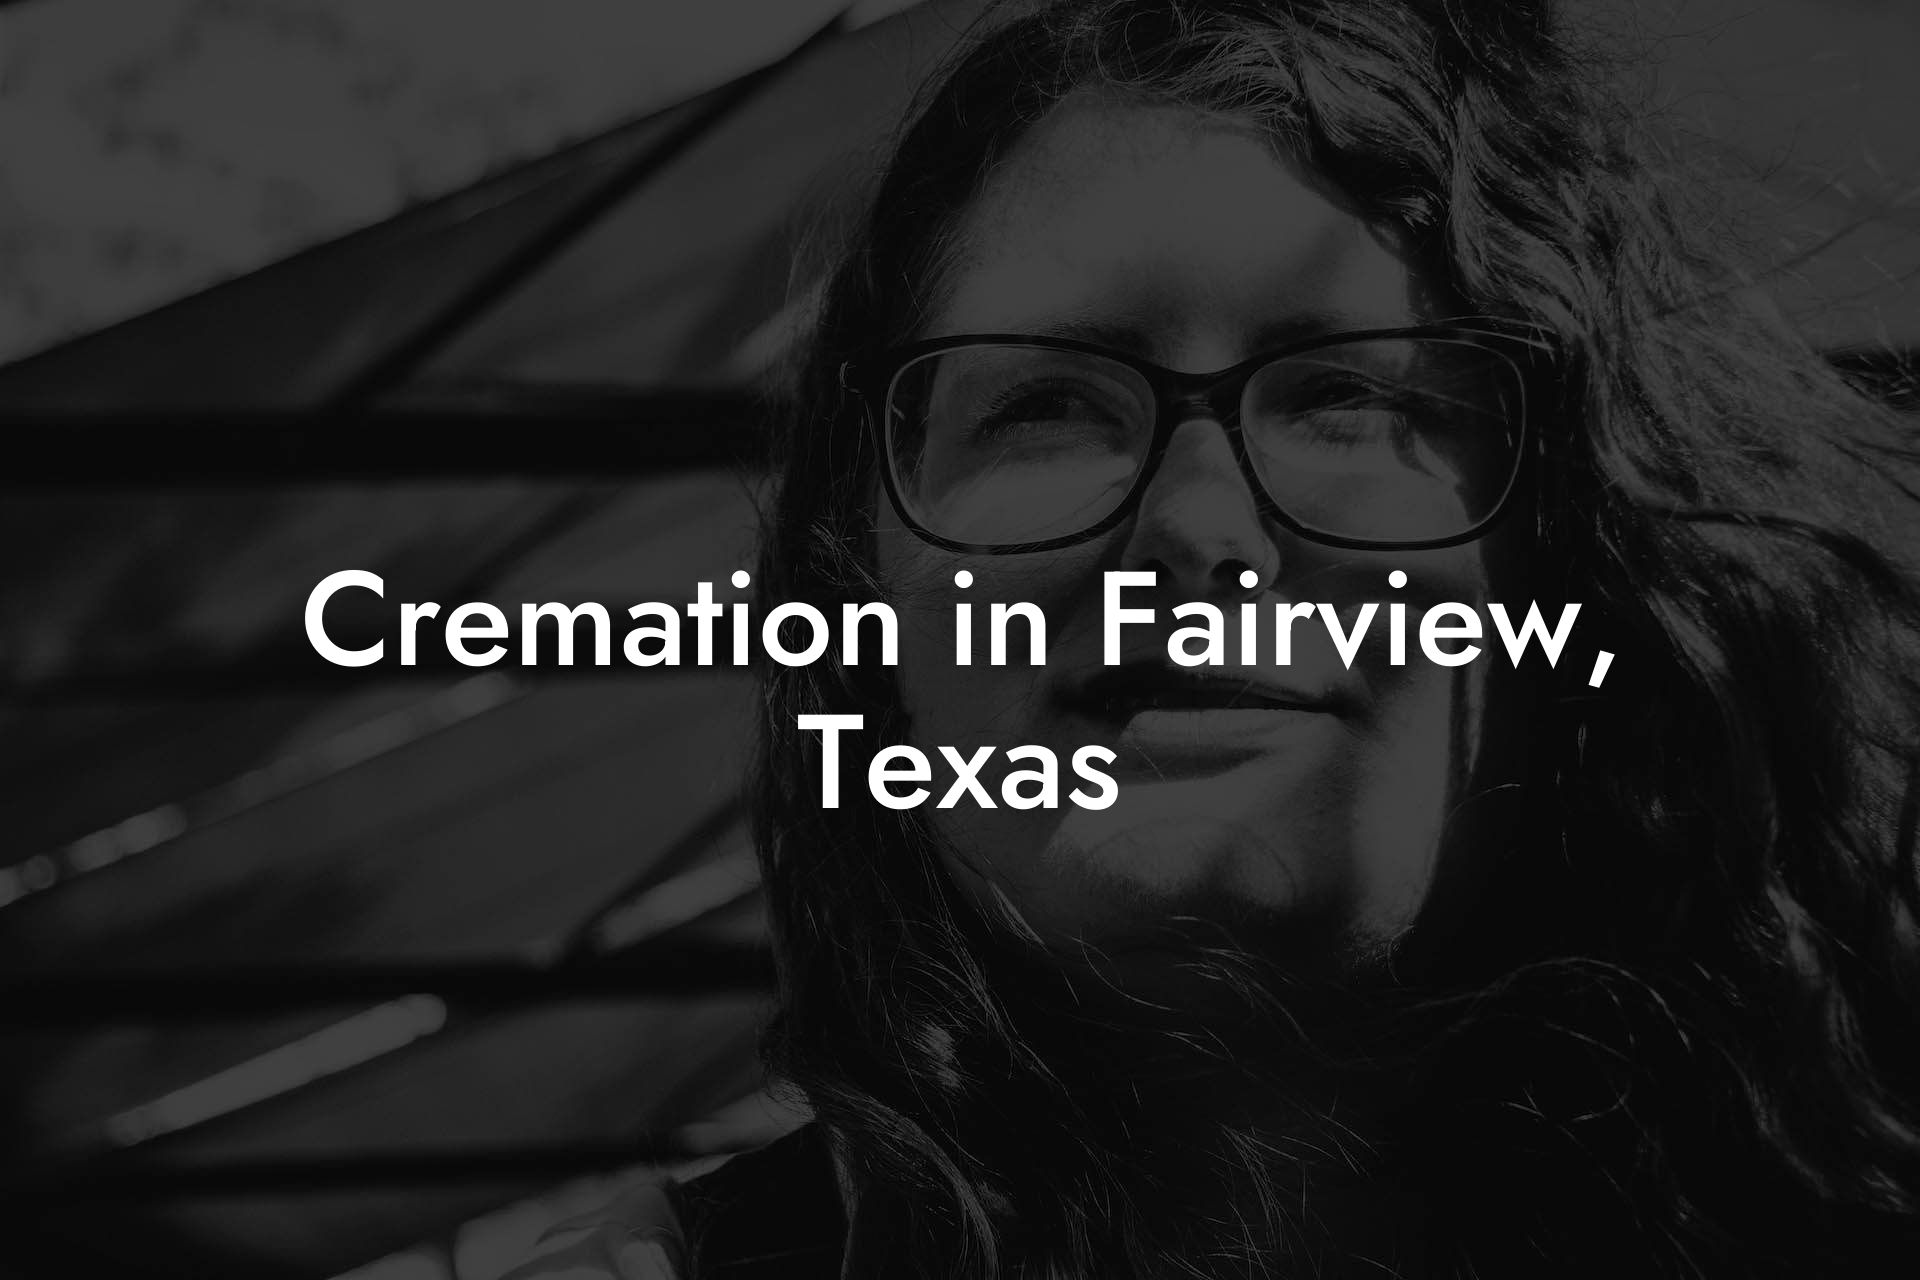 Cremation in Fairview, Texas